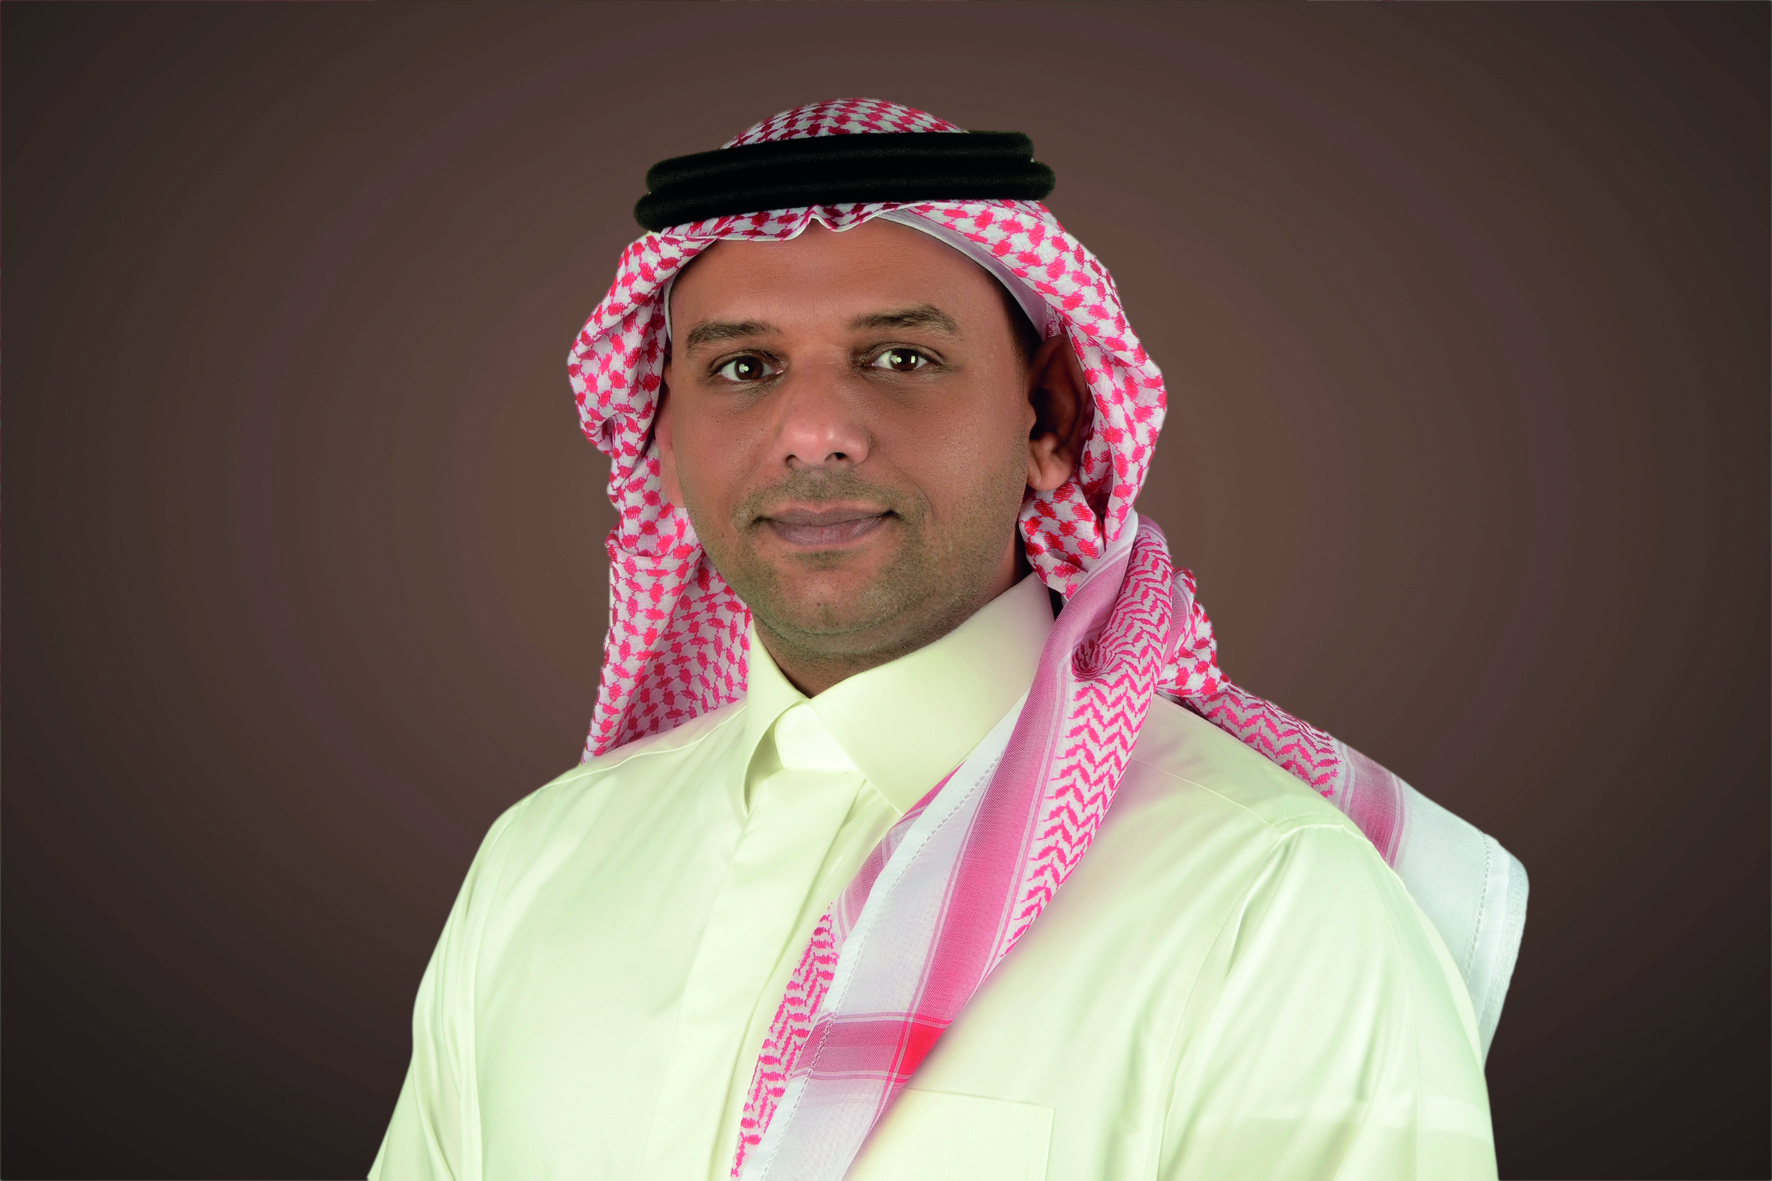 Ahmed Alajmi chairman & founder of THG talks about success in the kingdom